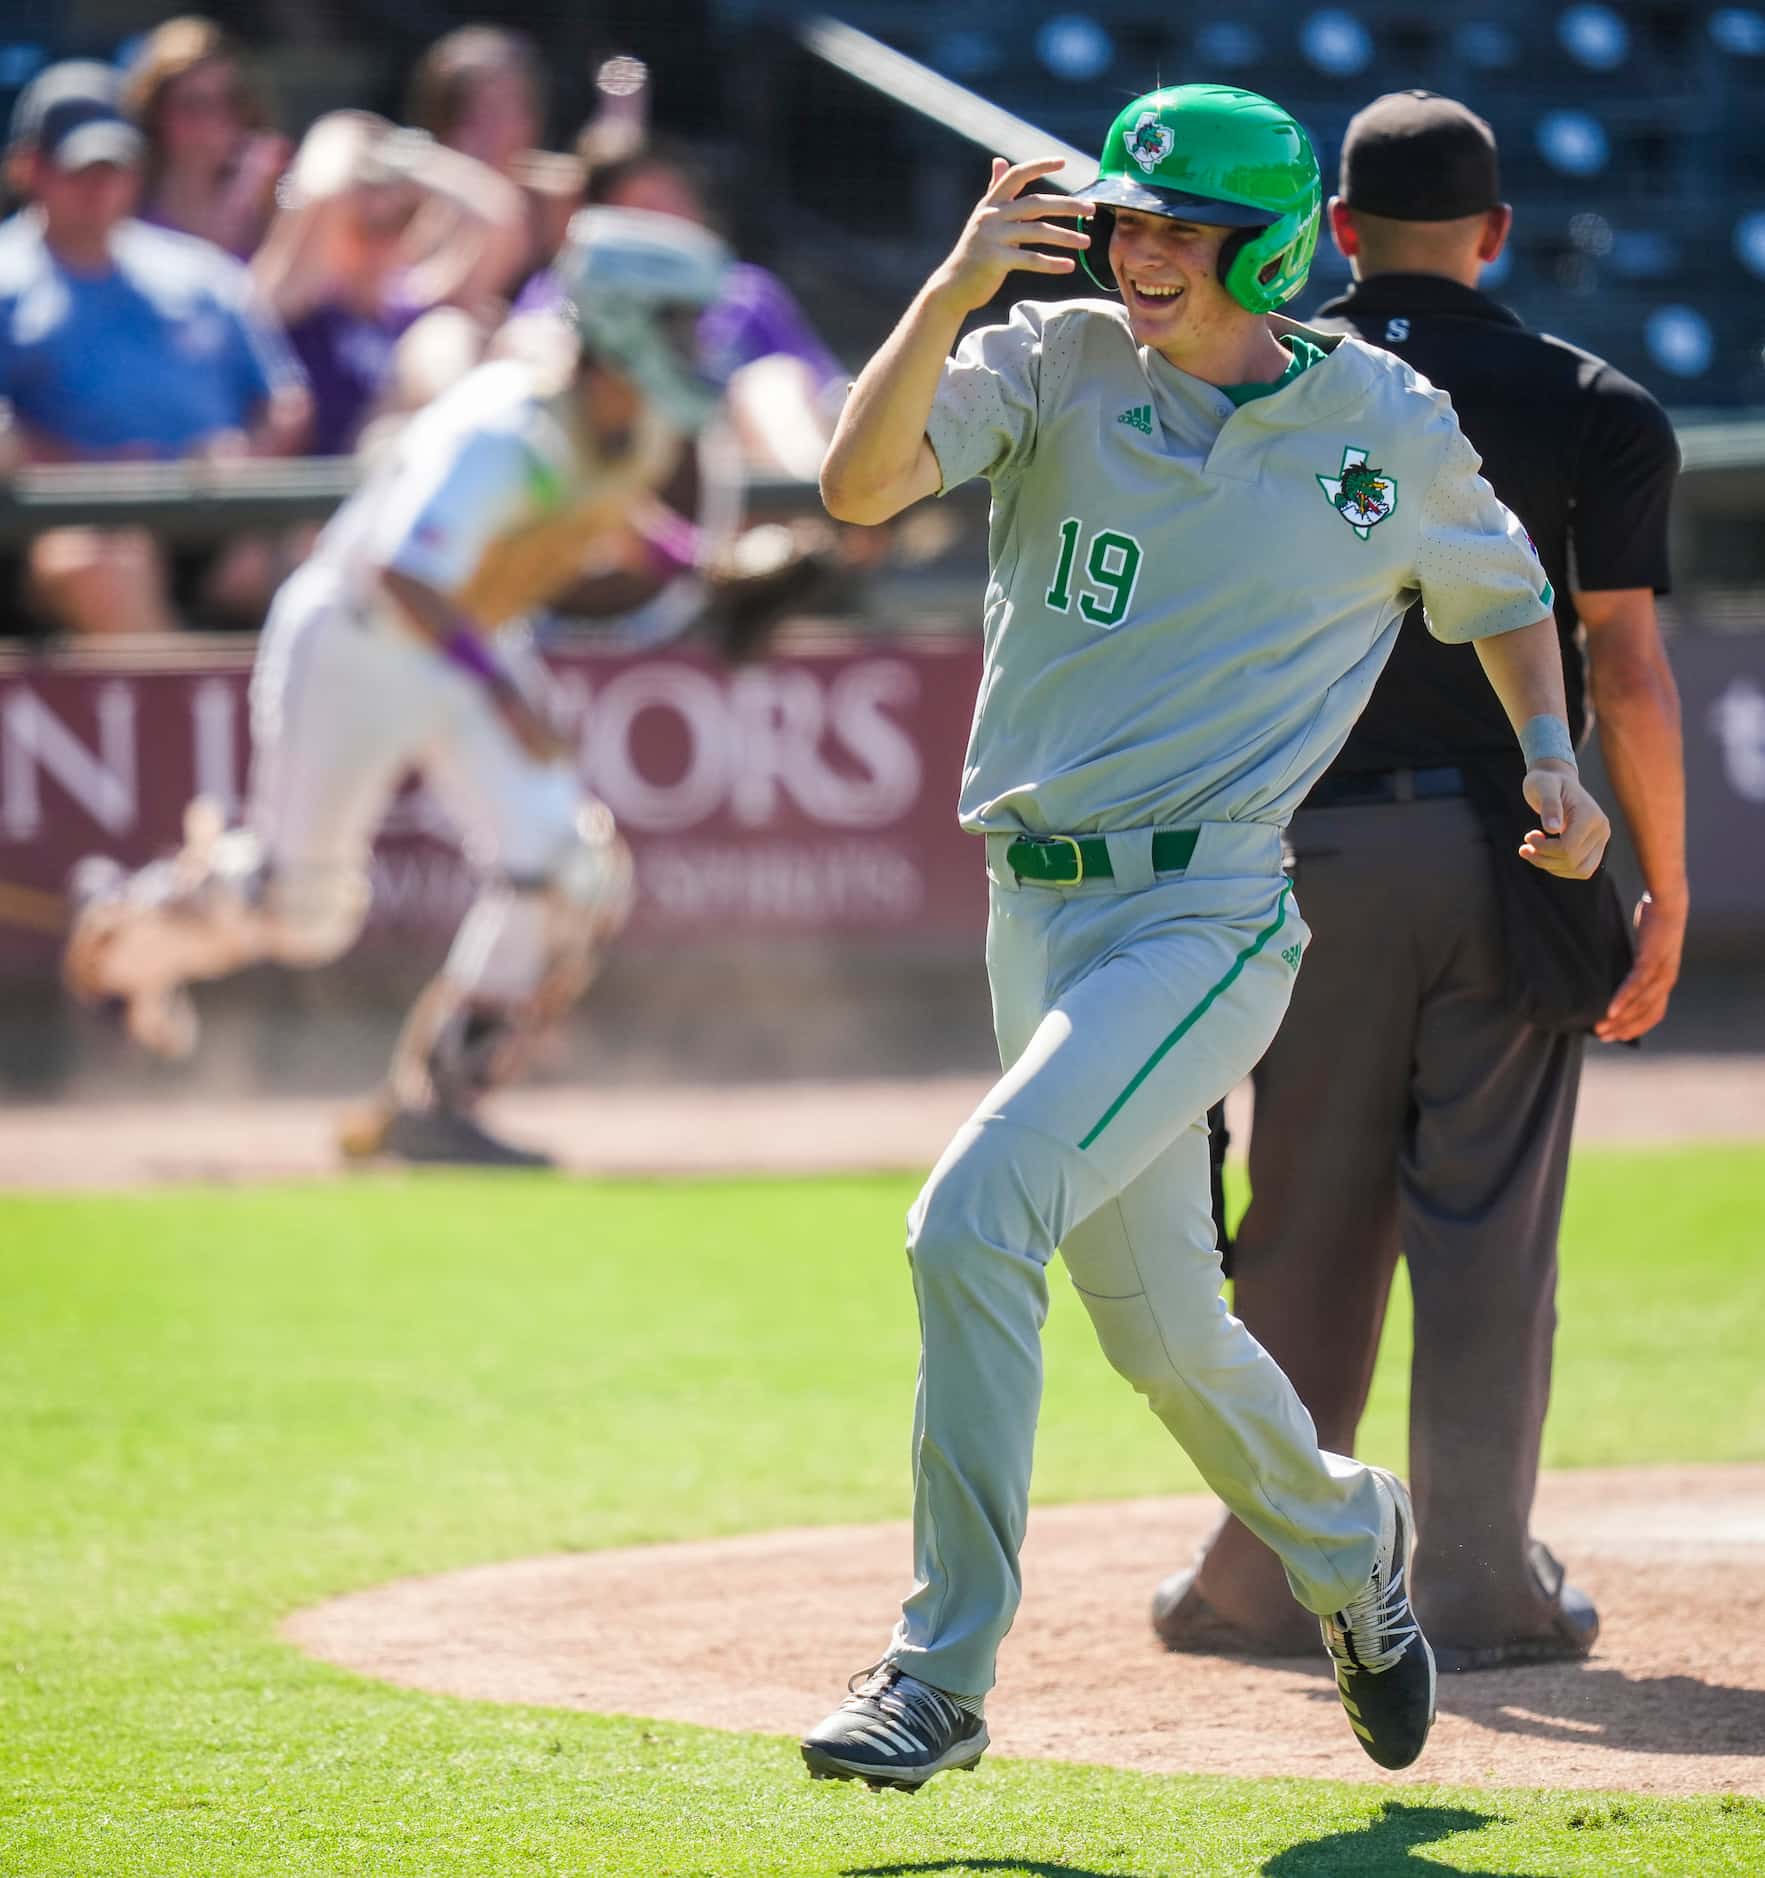 Southlake Carroll outfielder Tanner Sumer celebrates after scoring from third after the ball...